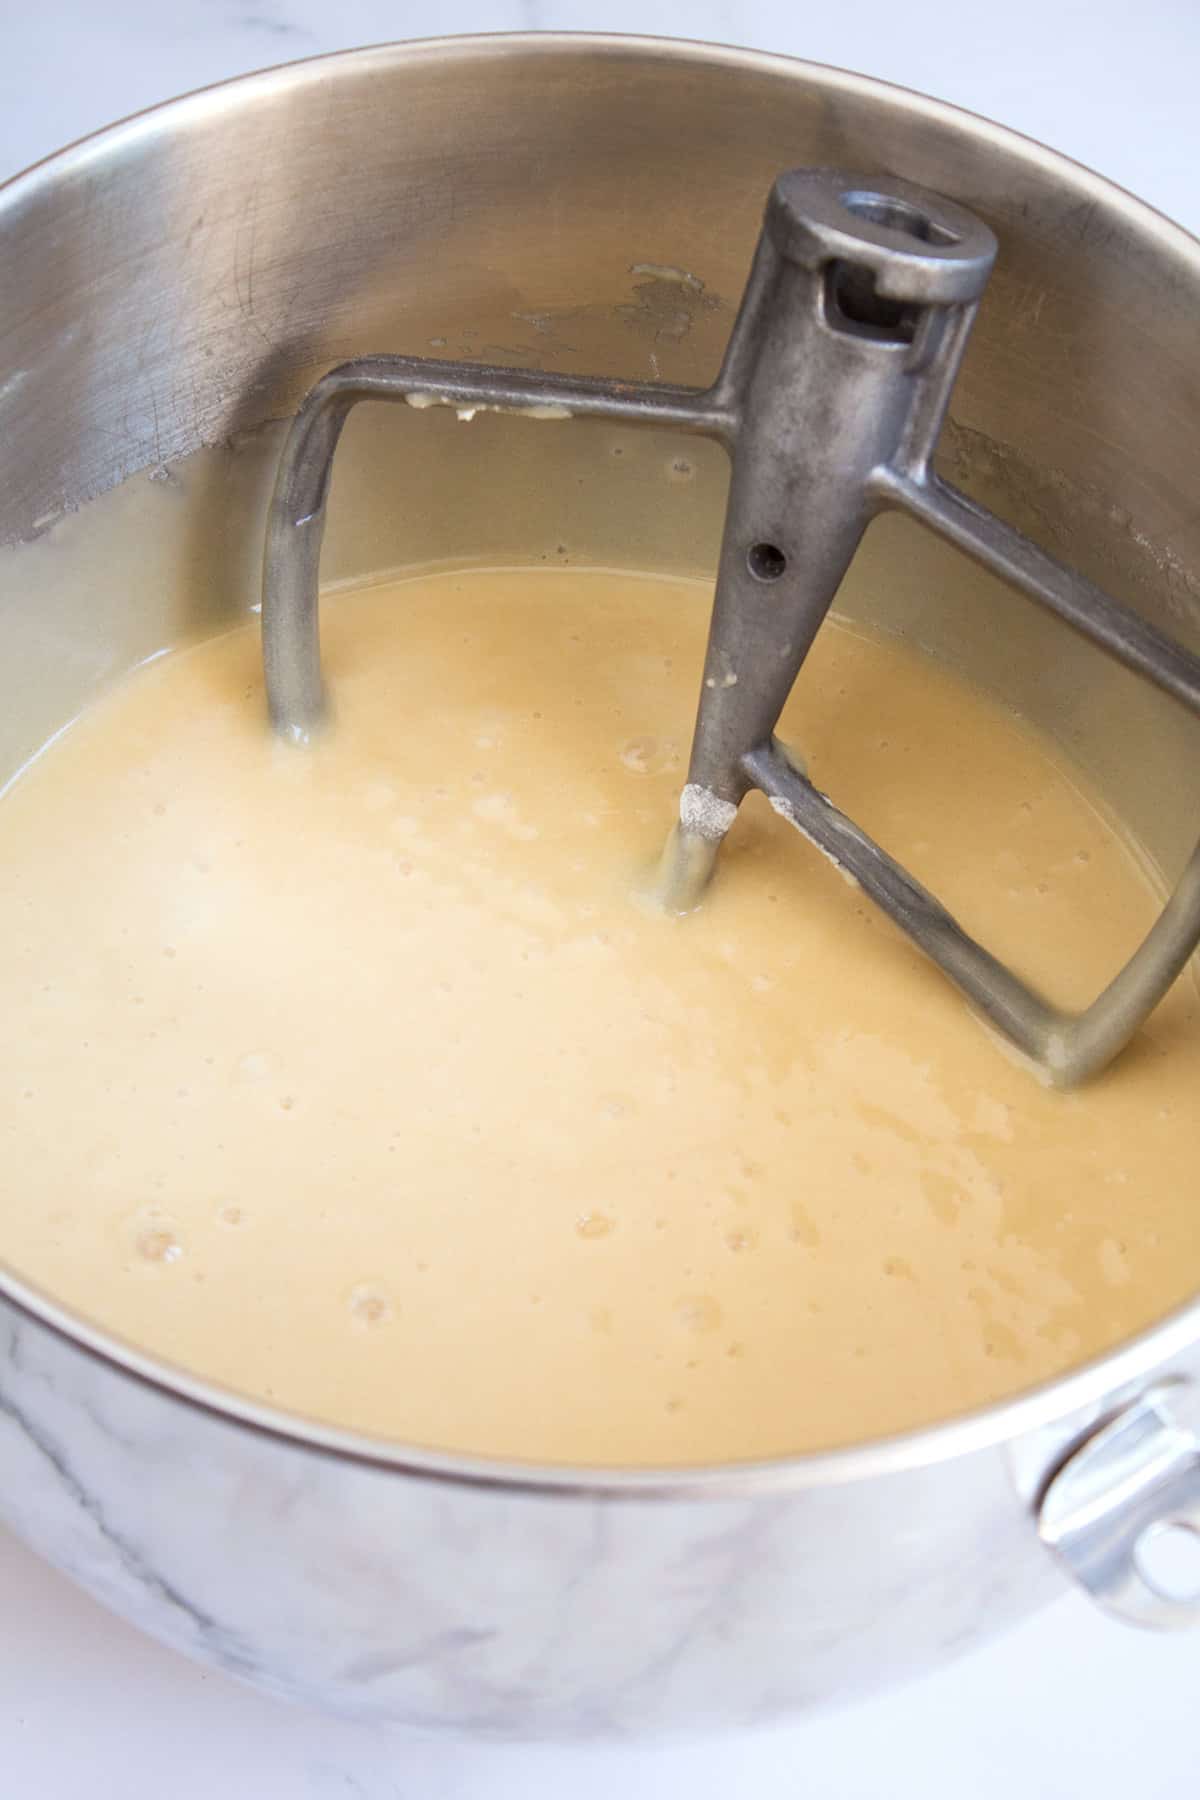 Stainless steel mixing bowl full of cake batter before the chocolate has been added.